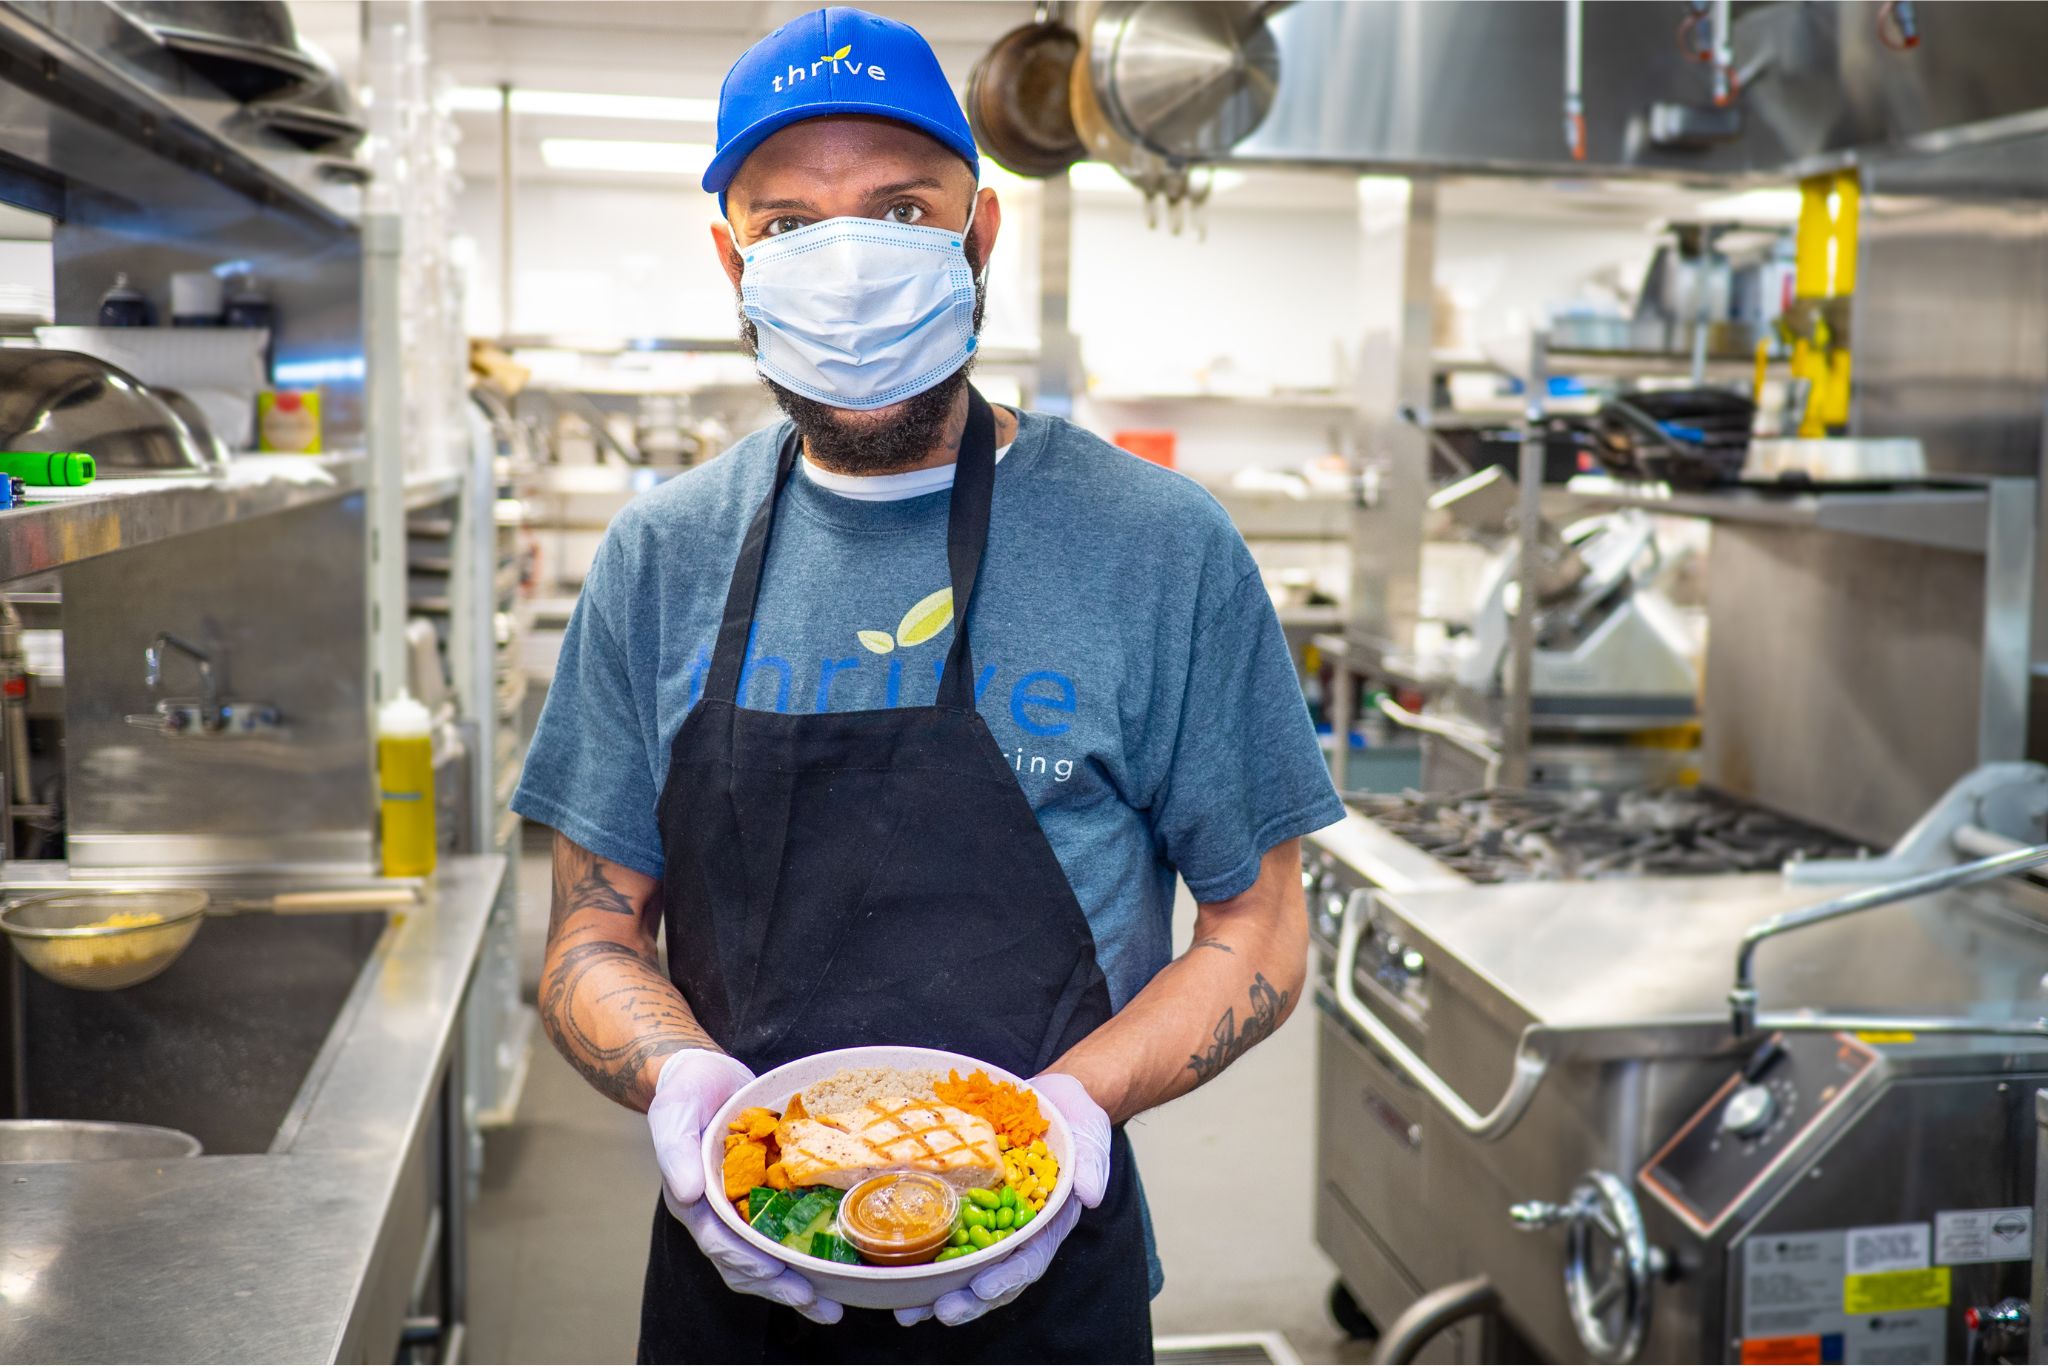 Lucas Joseph Ramsey, cook for Thrive Catering, stands in the kitchen holding out a rice bowl with beautifully grilled chicken and vegetables.